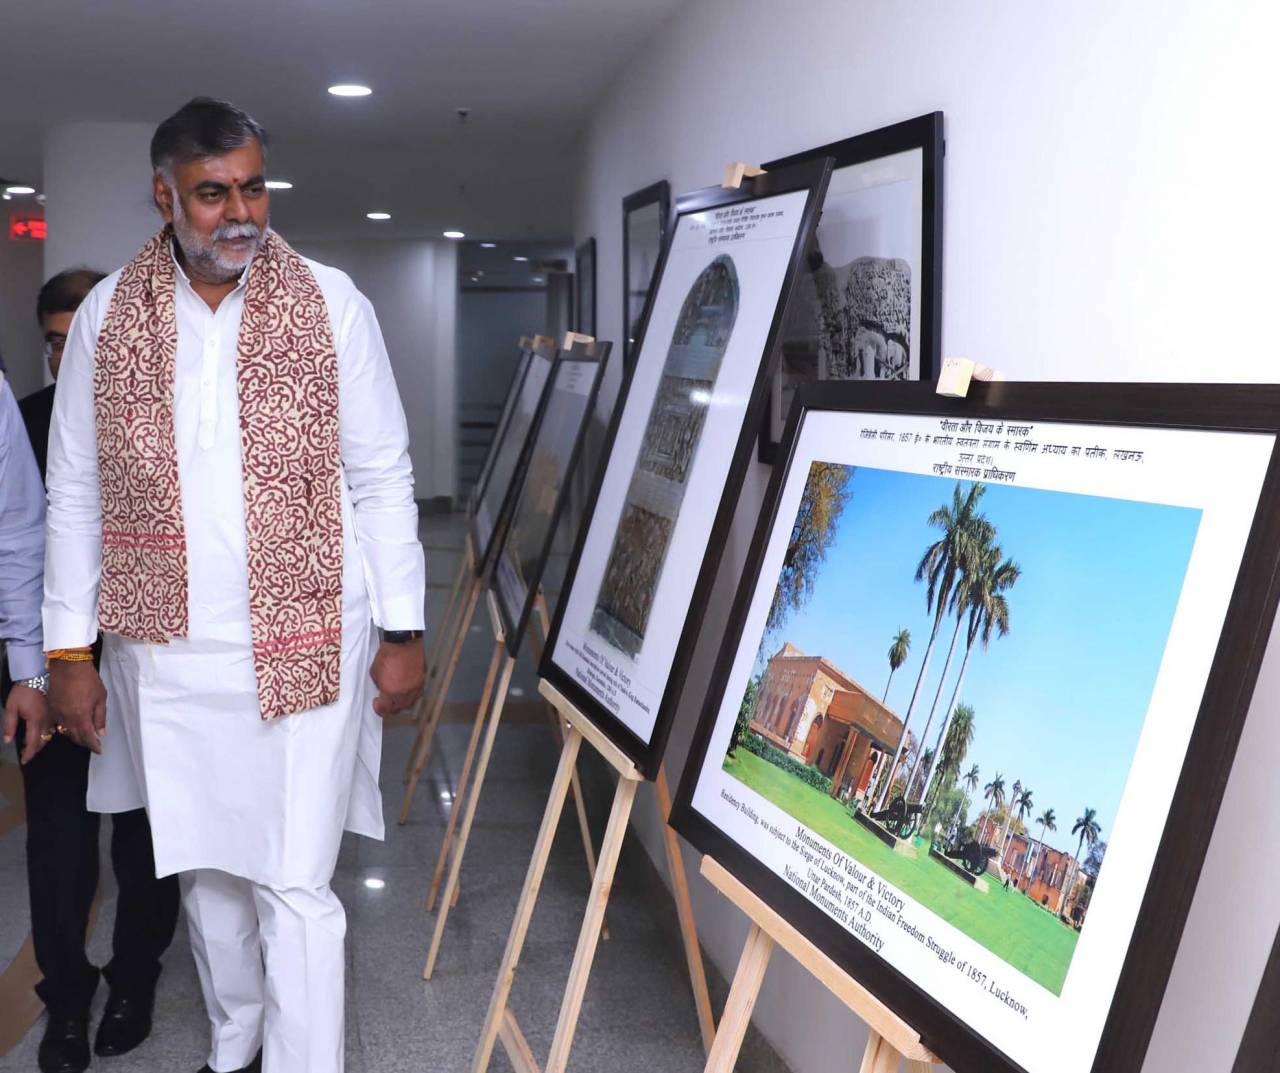 Minister of State for Culture and Tourism (Independent Charge), Prahalad Singh Patel visiting an Exhibition on the 20th Anniversary of Kargil Vijay Diwas, in New Delhi on July 26.